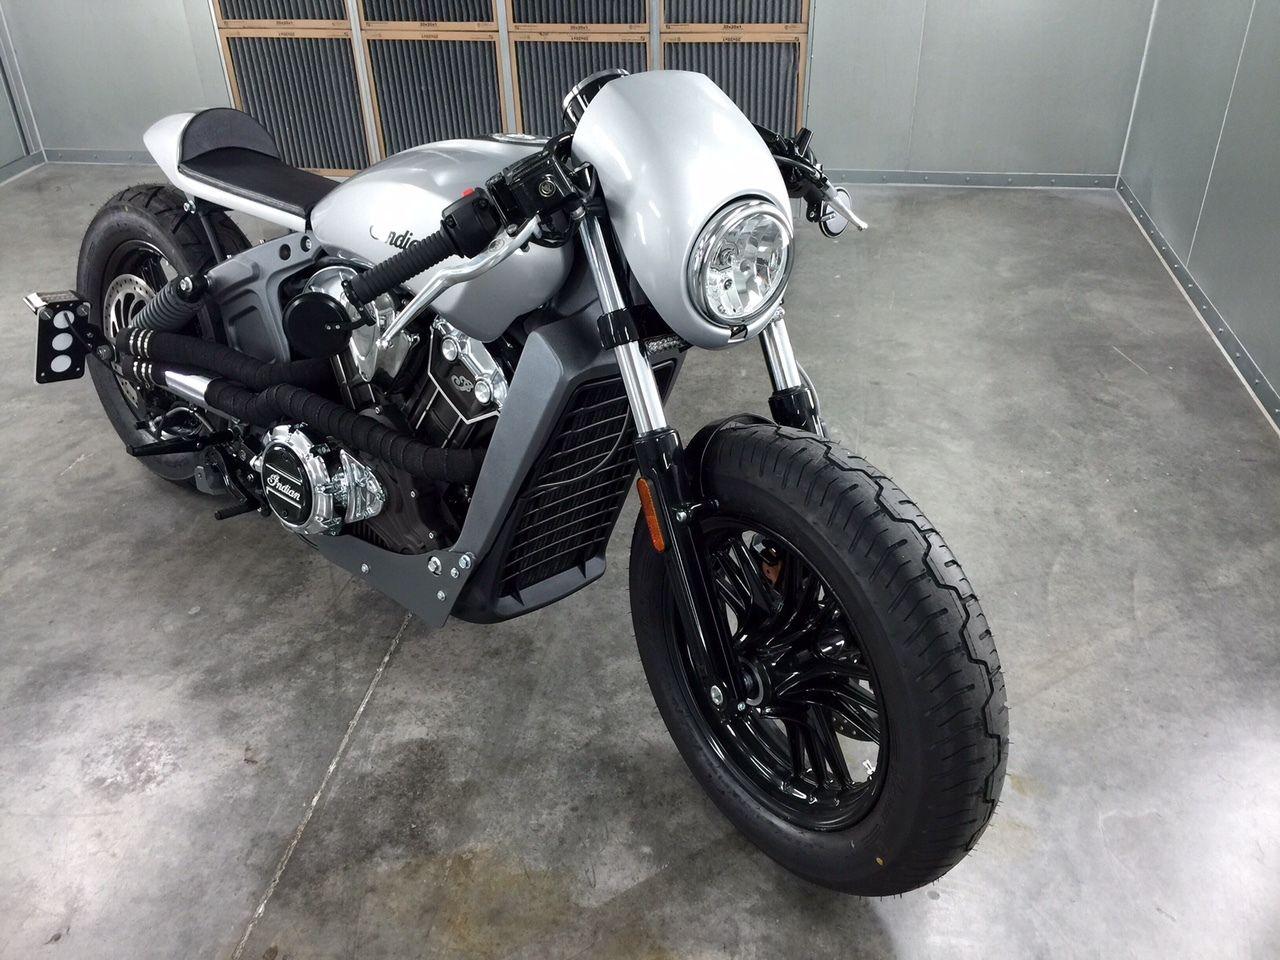 2015 Indian Scout Cafe Racer custom